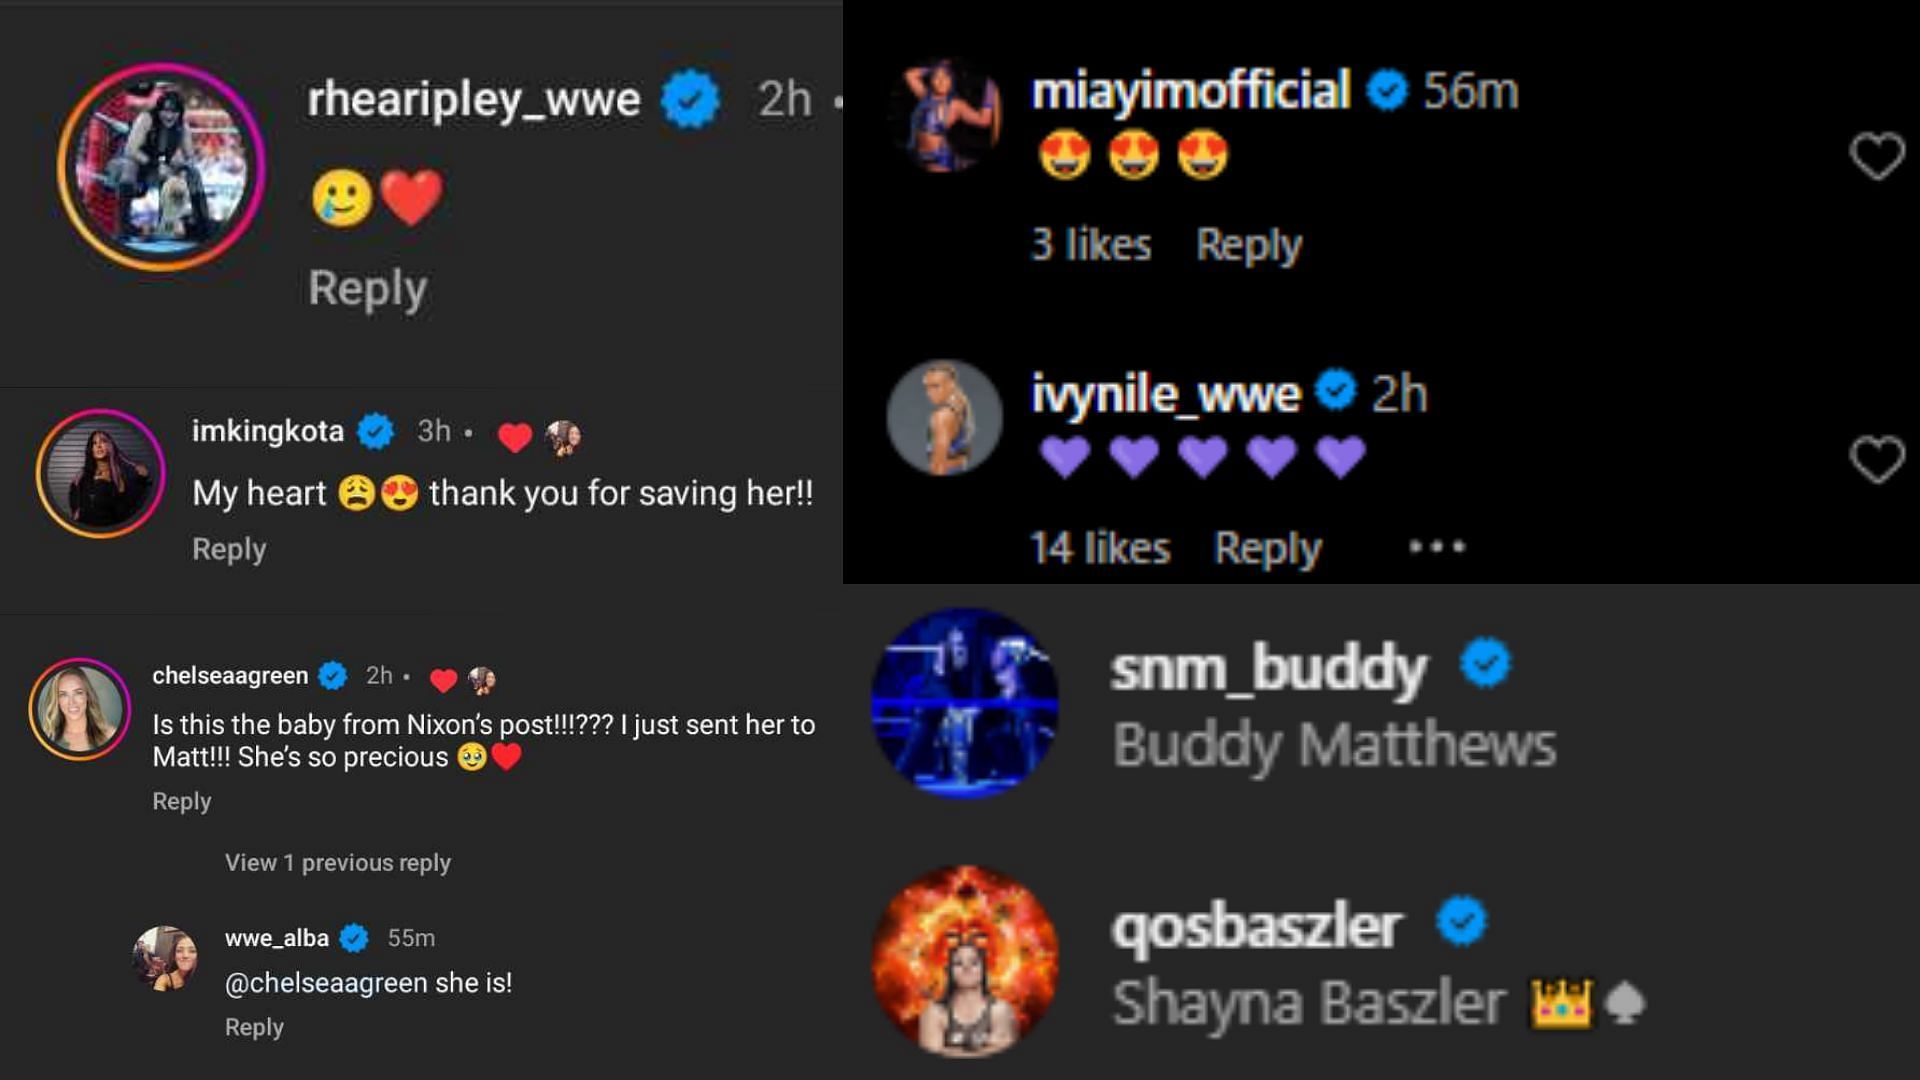 The comments were filled with love by Rhea Ripley, Chelsea Green, and other WWE and AEW stars